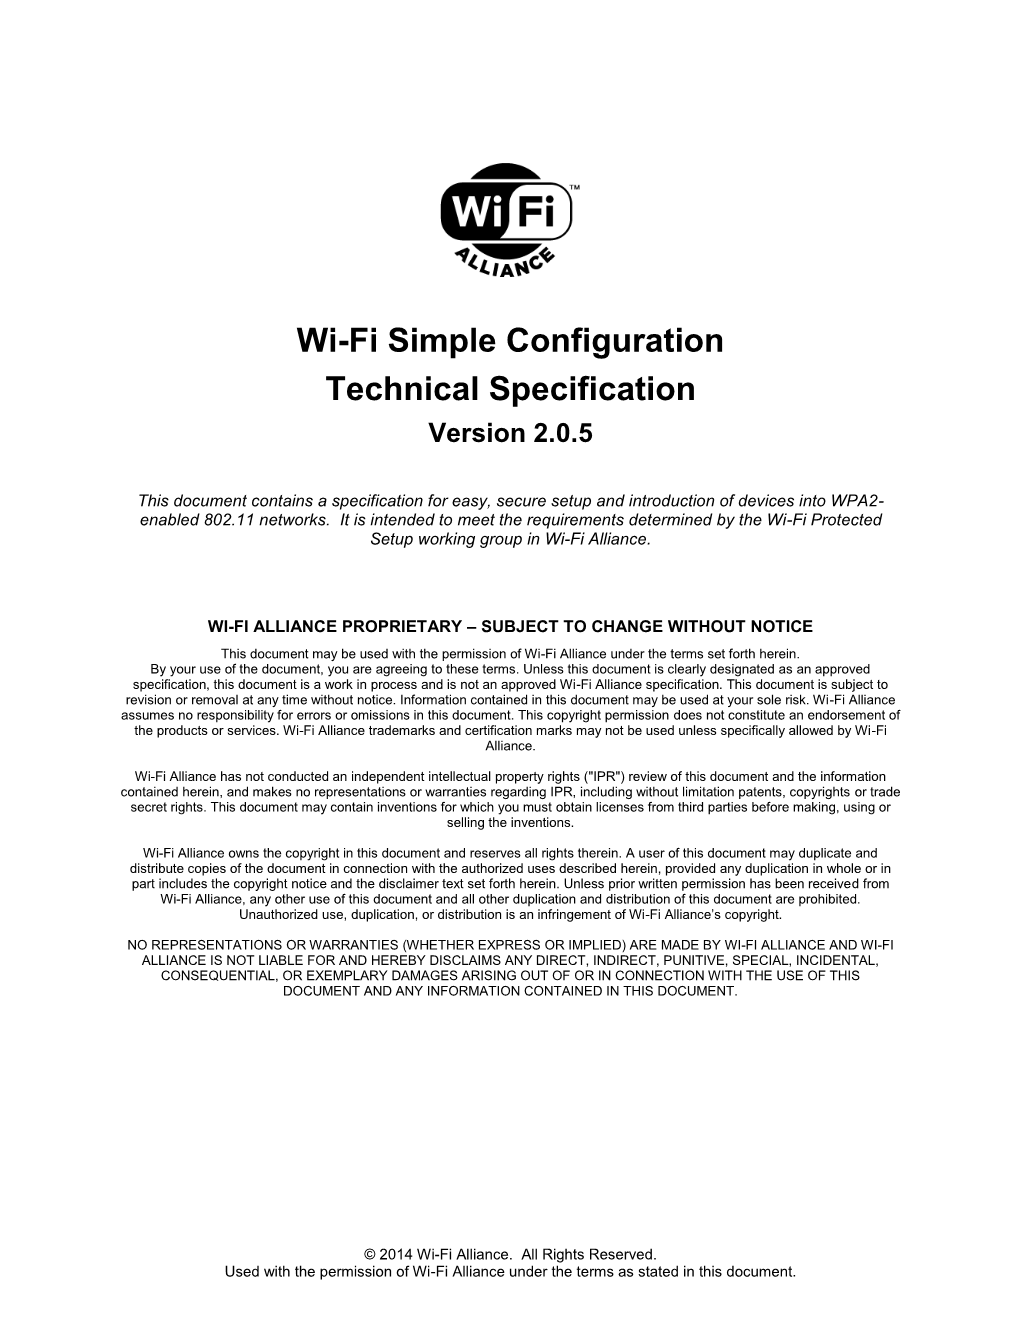 Wi-Fi Simple Configuration Technical Specification Version 2.0.5